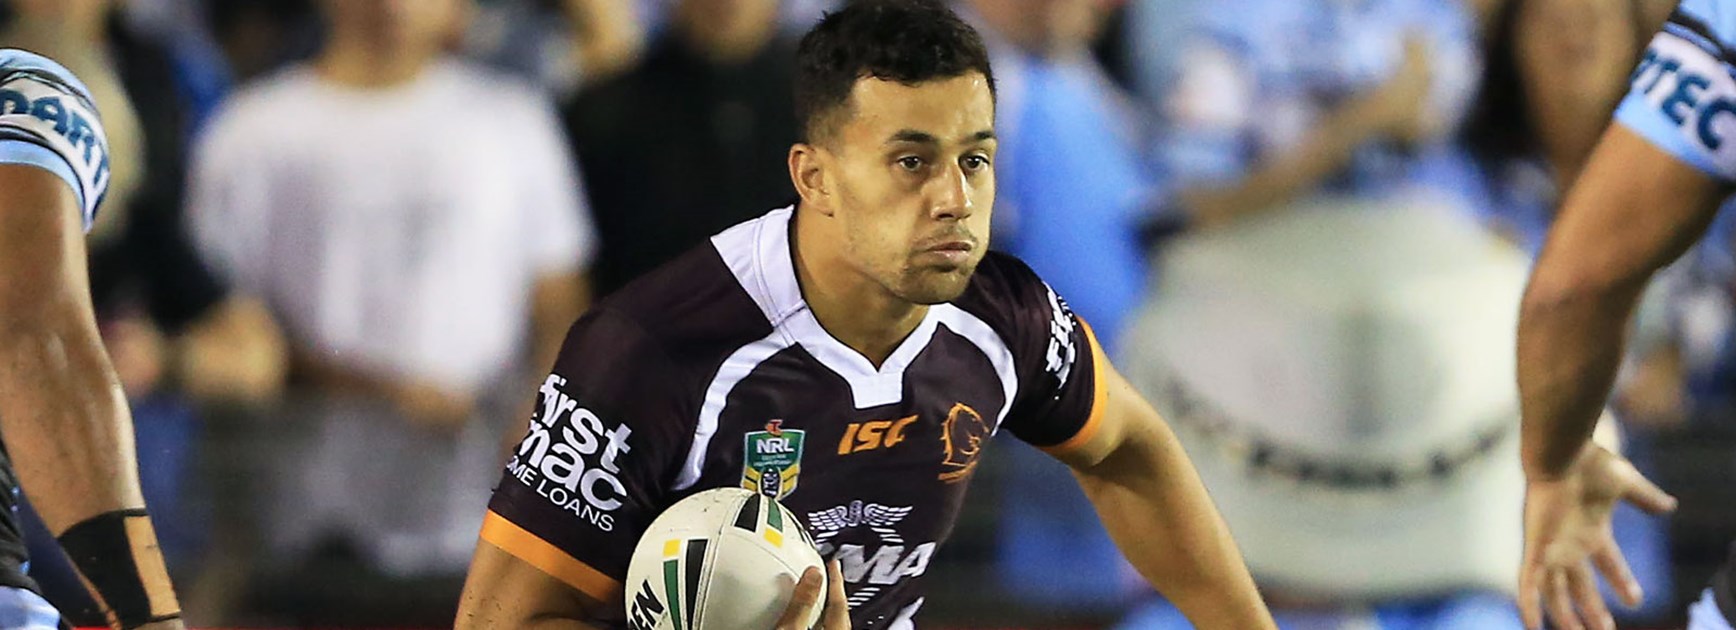 Broncos back Jordan Kahu wants to become one of the game's best goal-kickers.